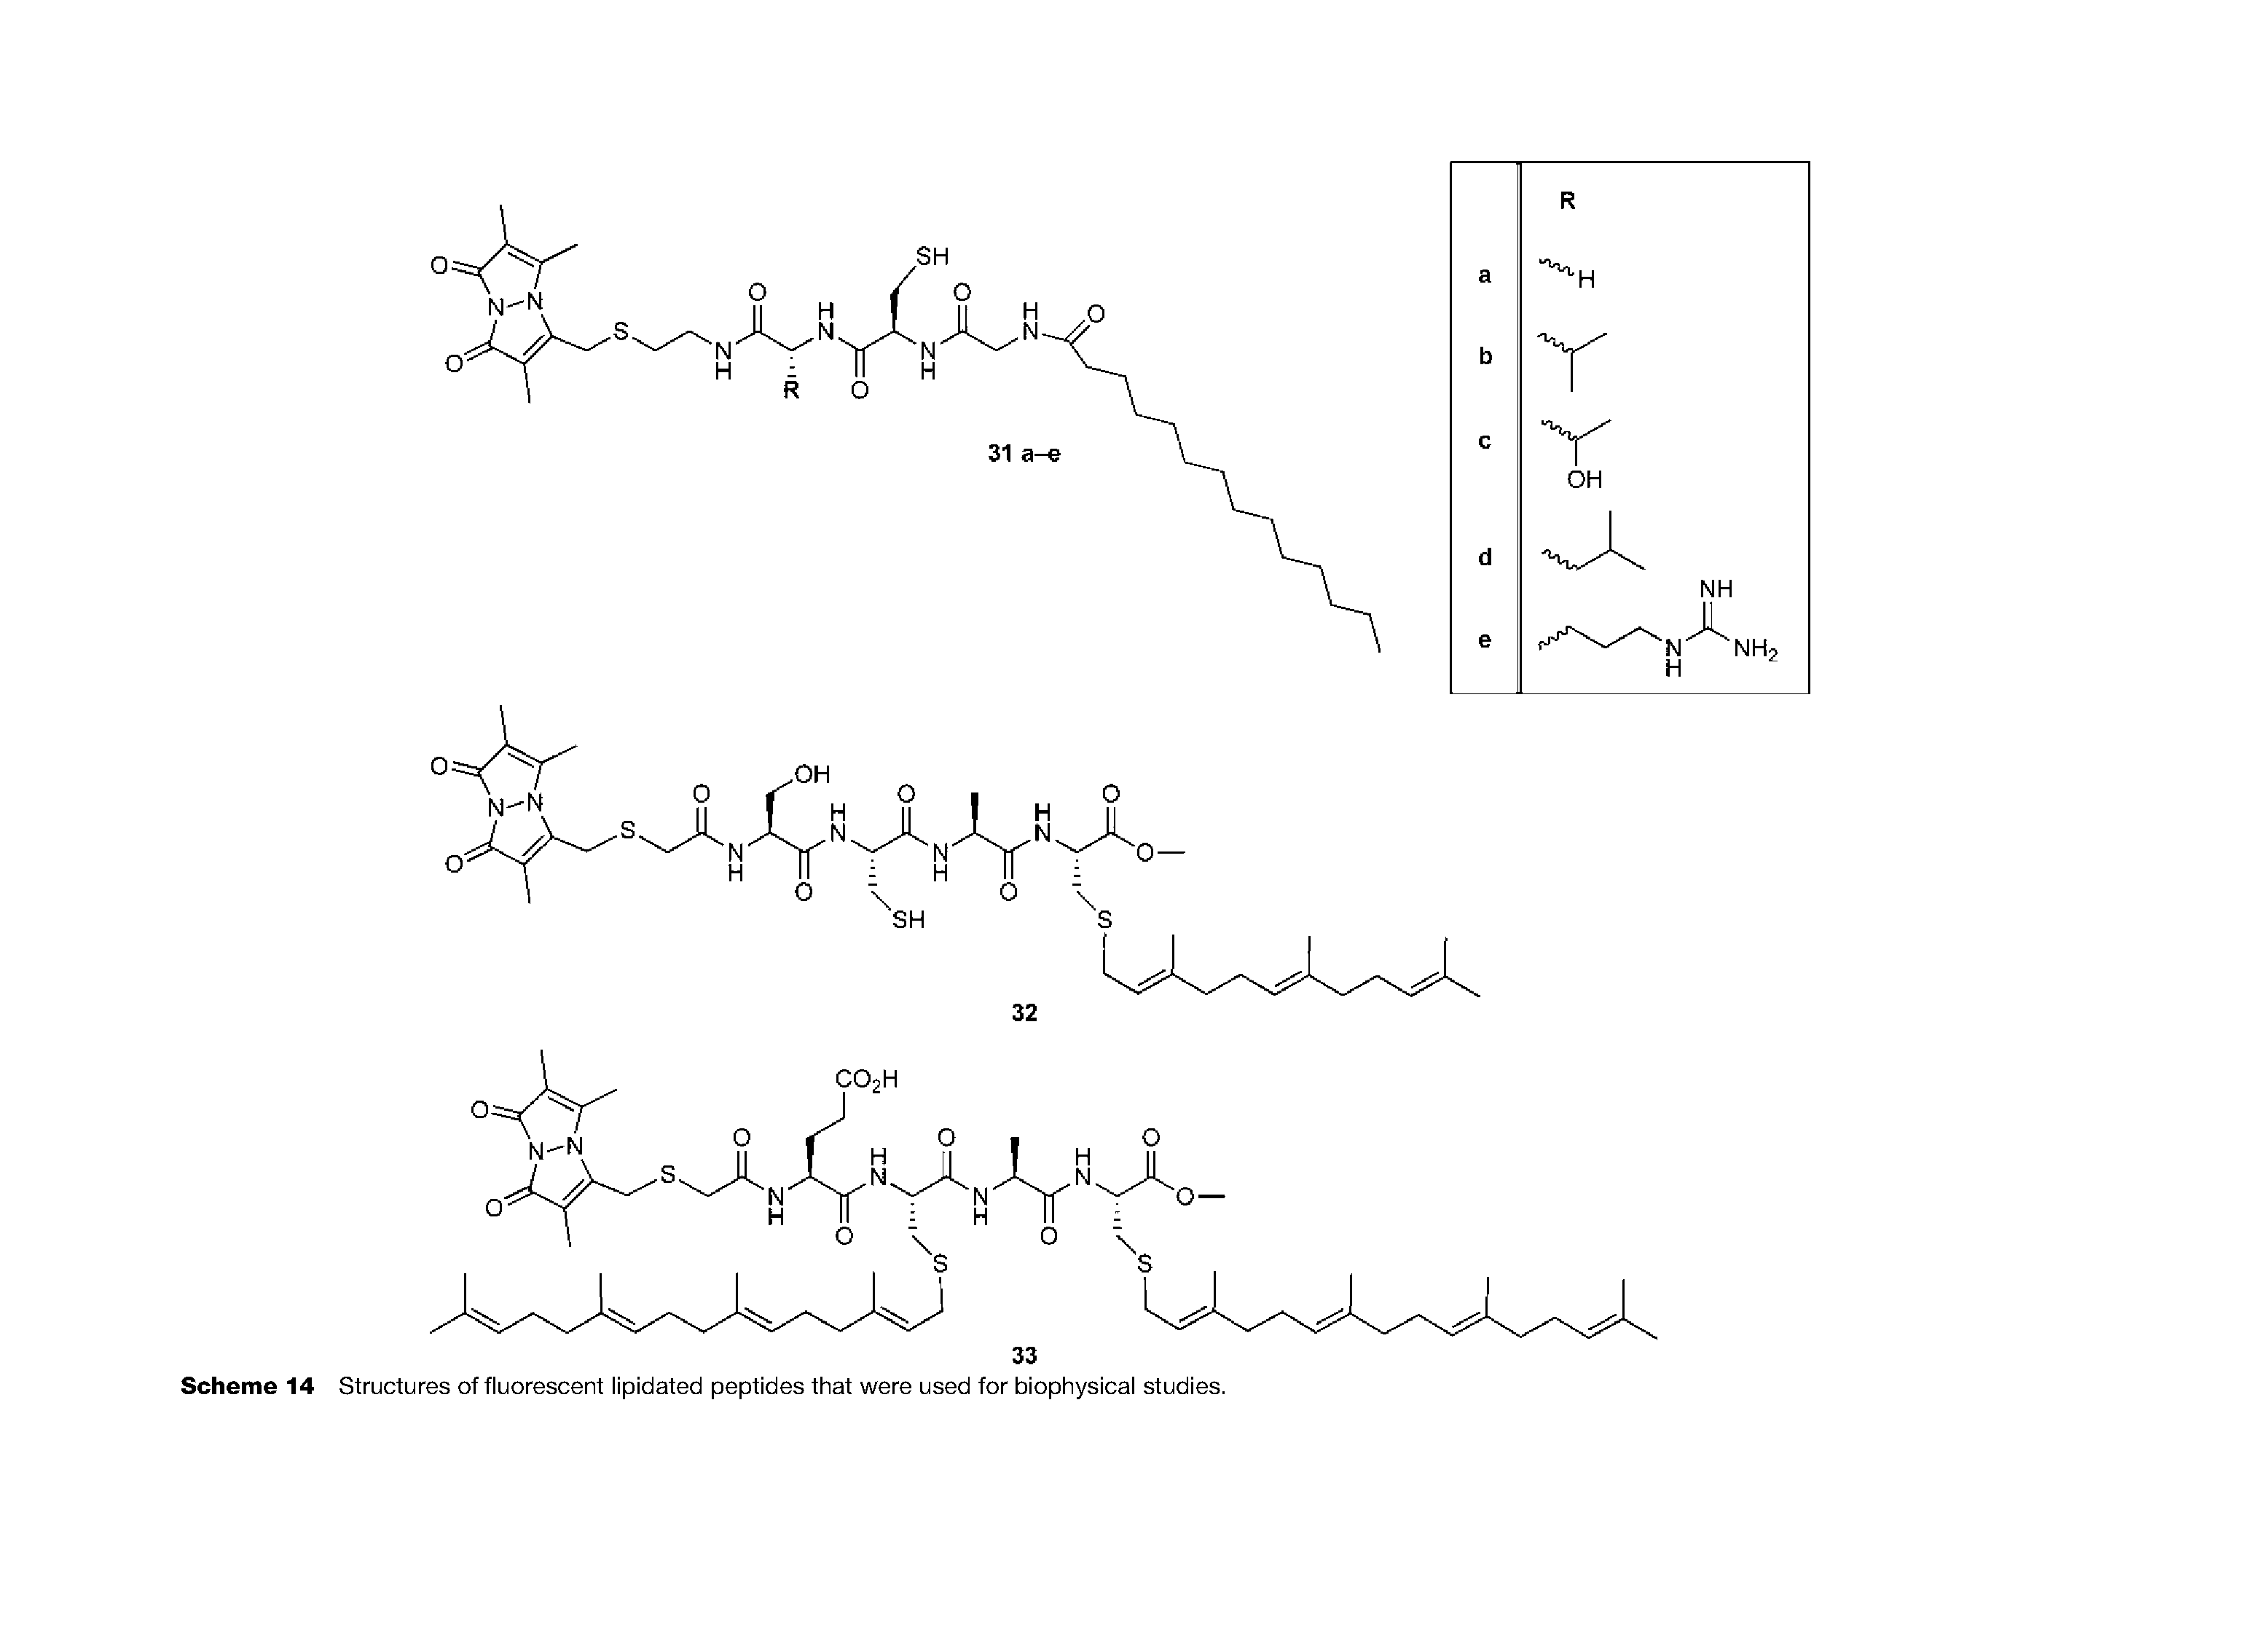 Scheme 14 Structures of fluorescent lipidated peptides that were used for biophysical studies.